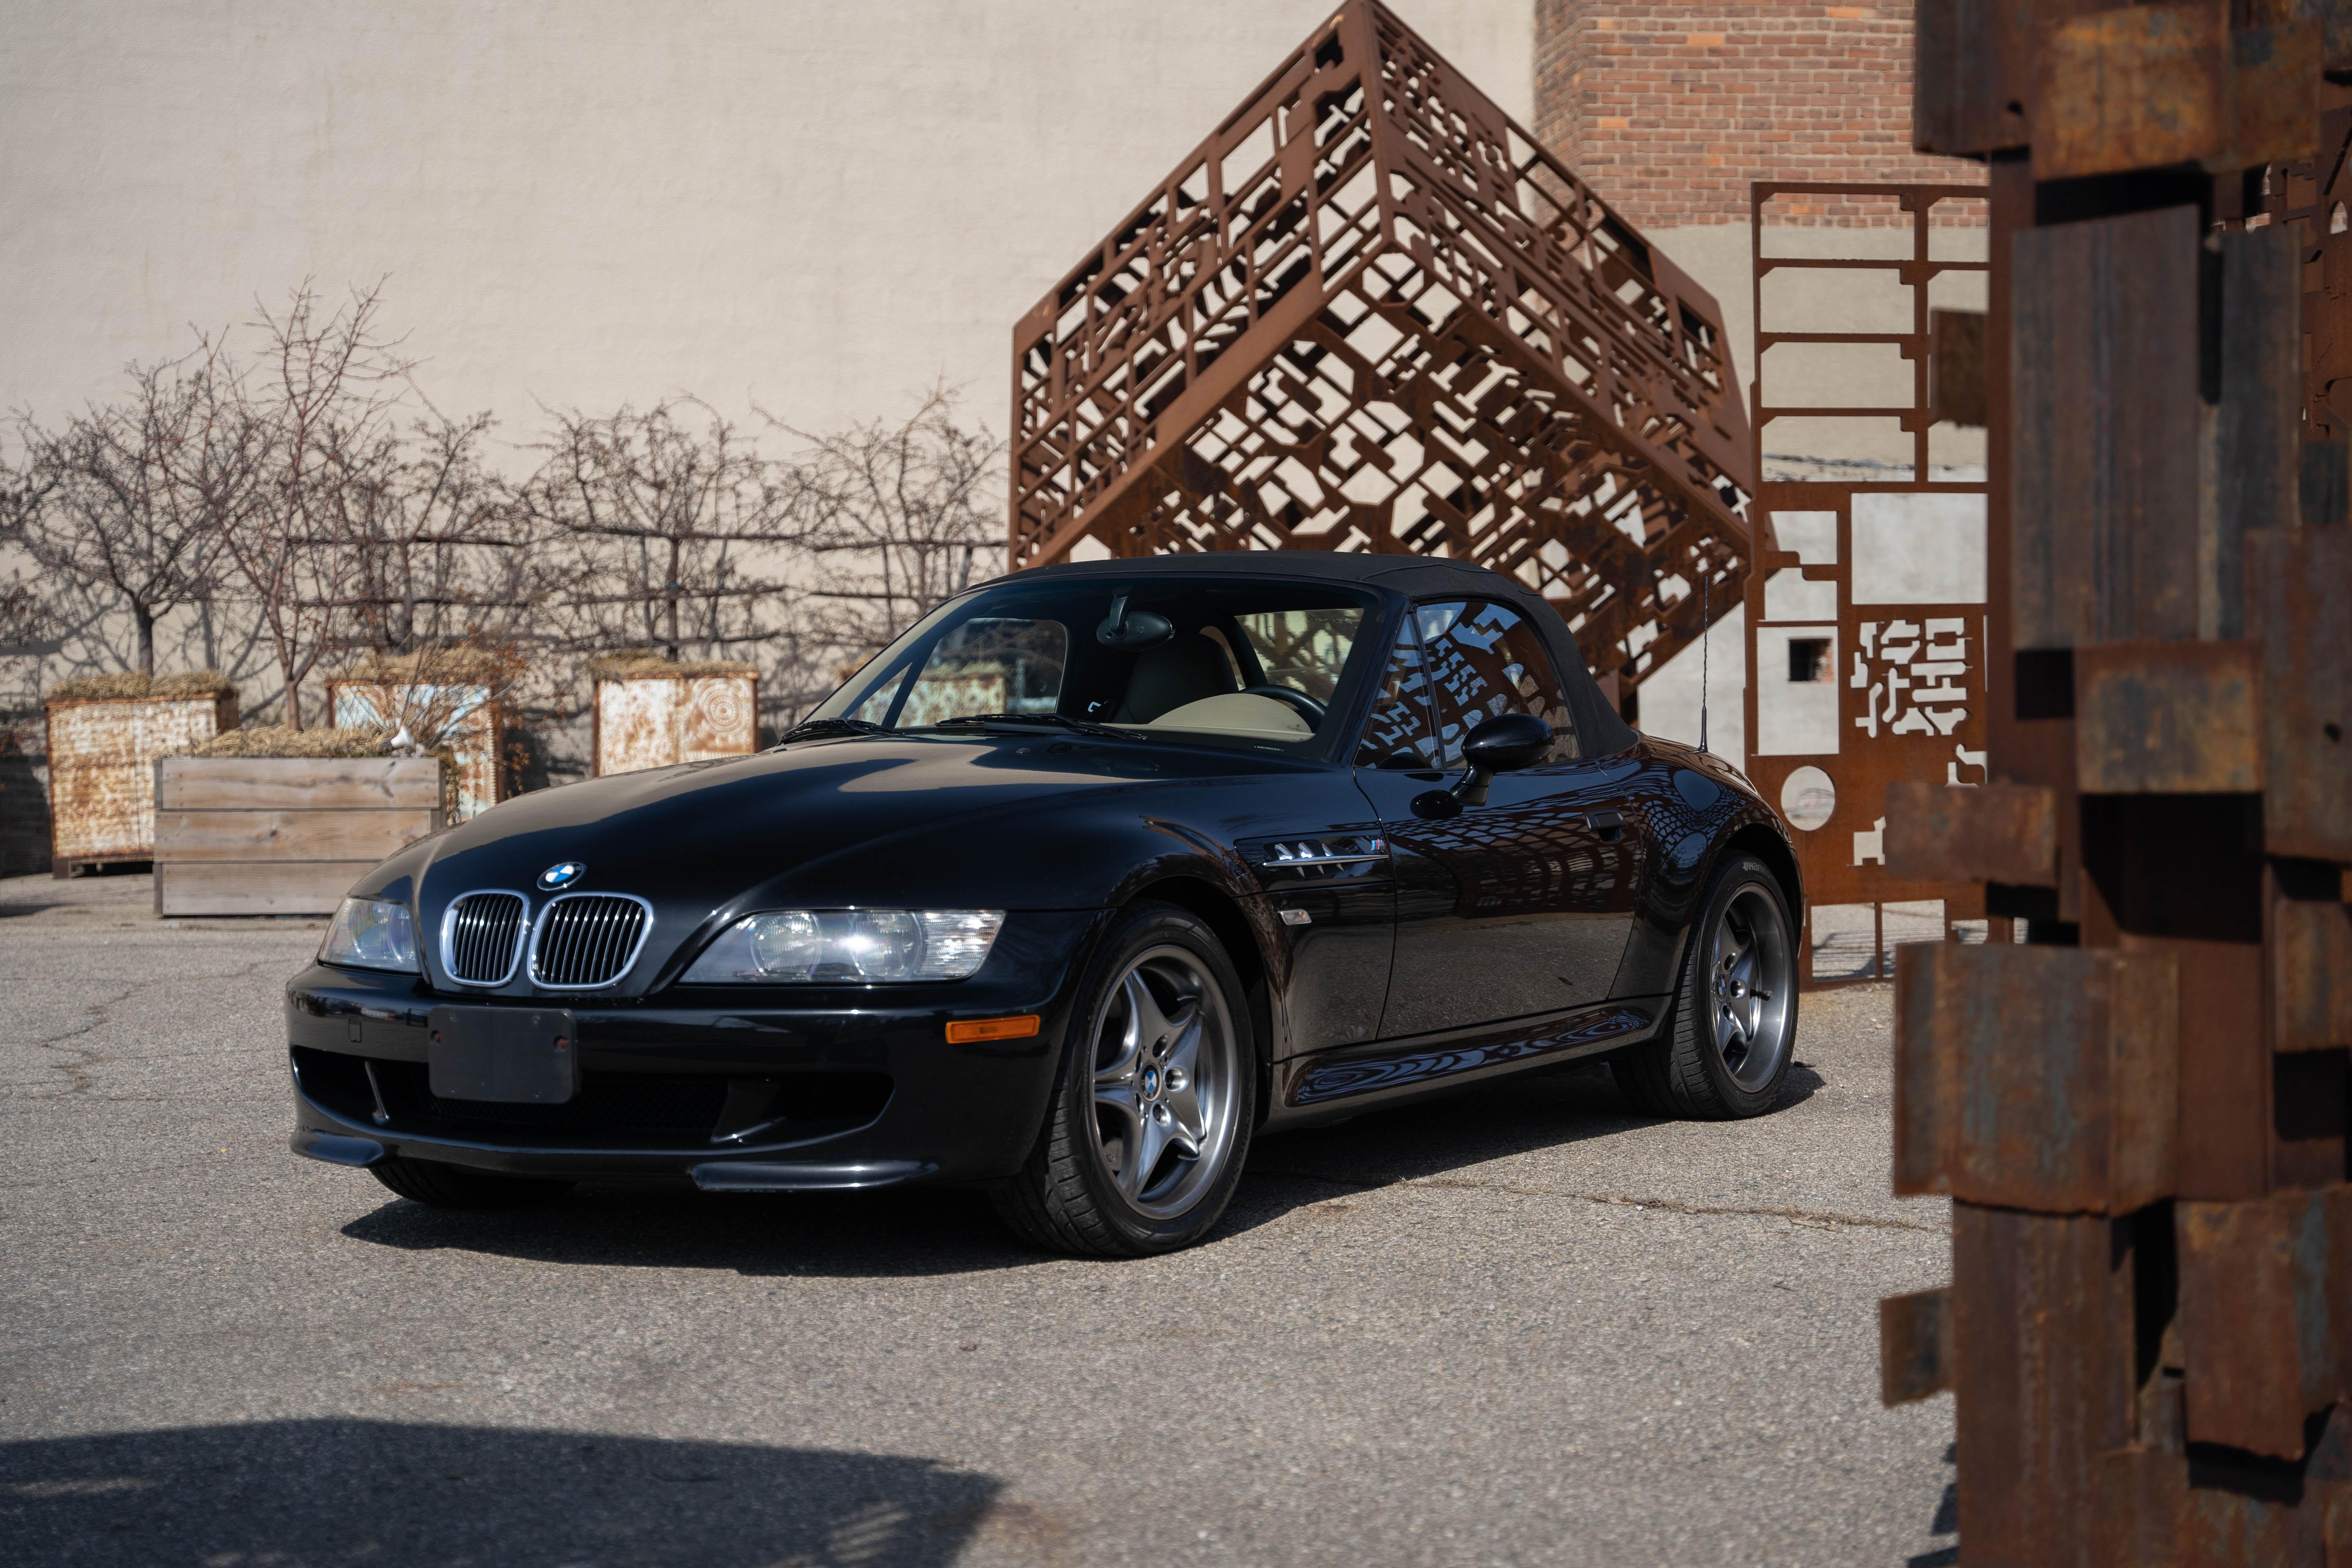 2002 BMW Z3M For Sale | Vintage Driving Machines